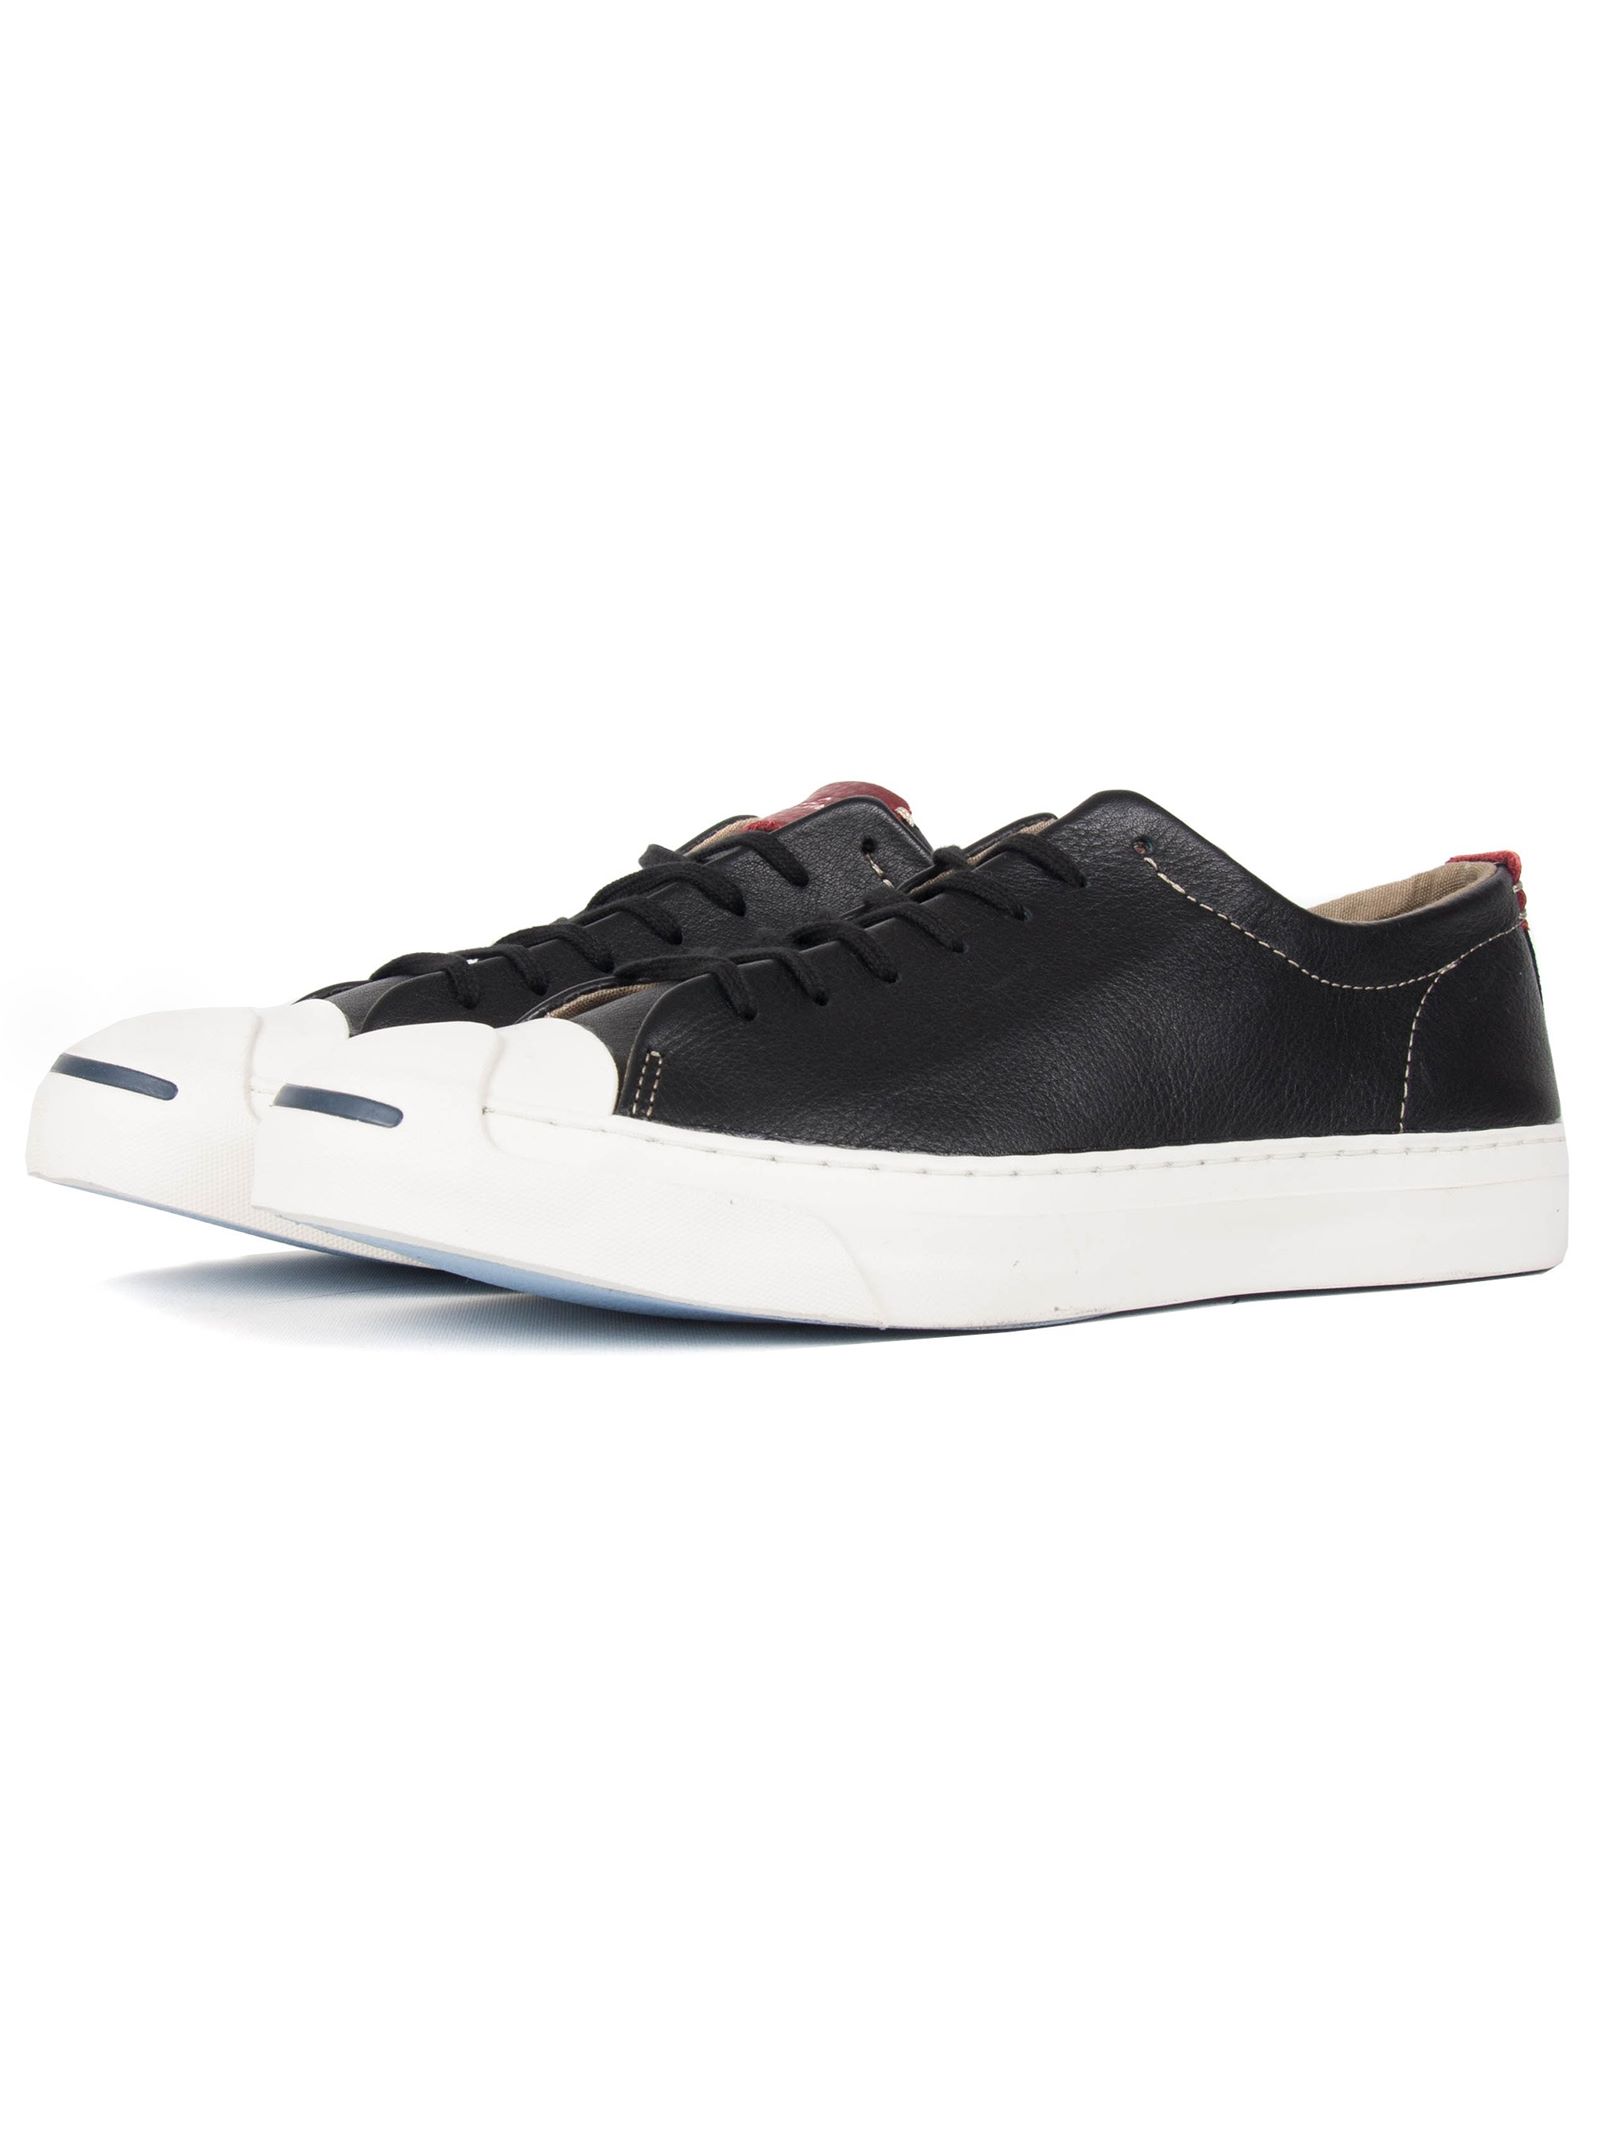 Converse Jack Purcell Tumbled Leather Black | Dapper Street